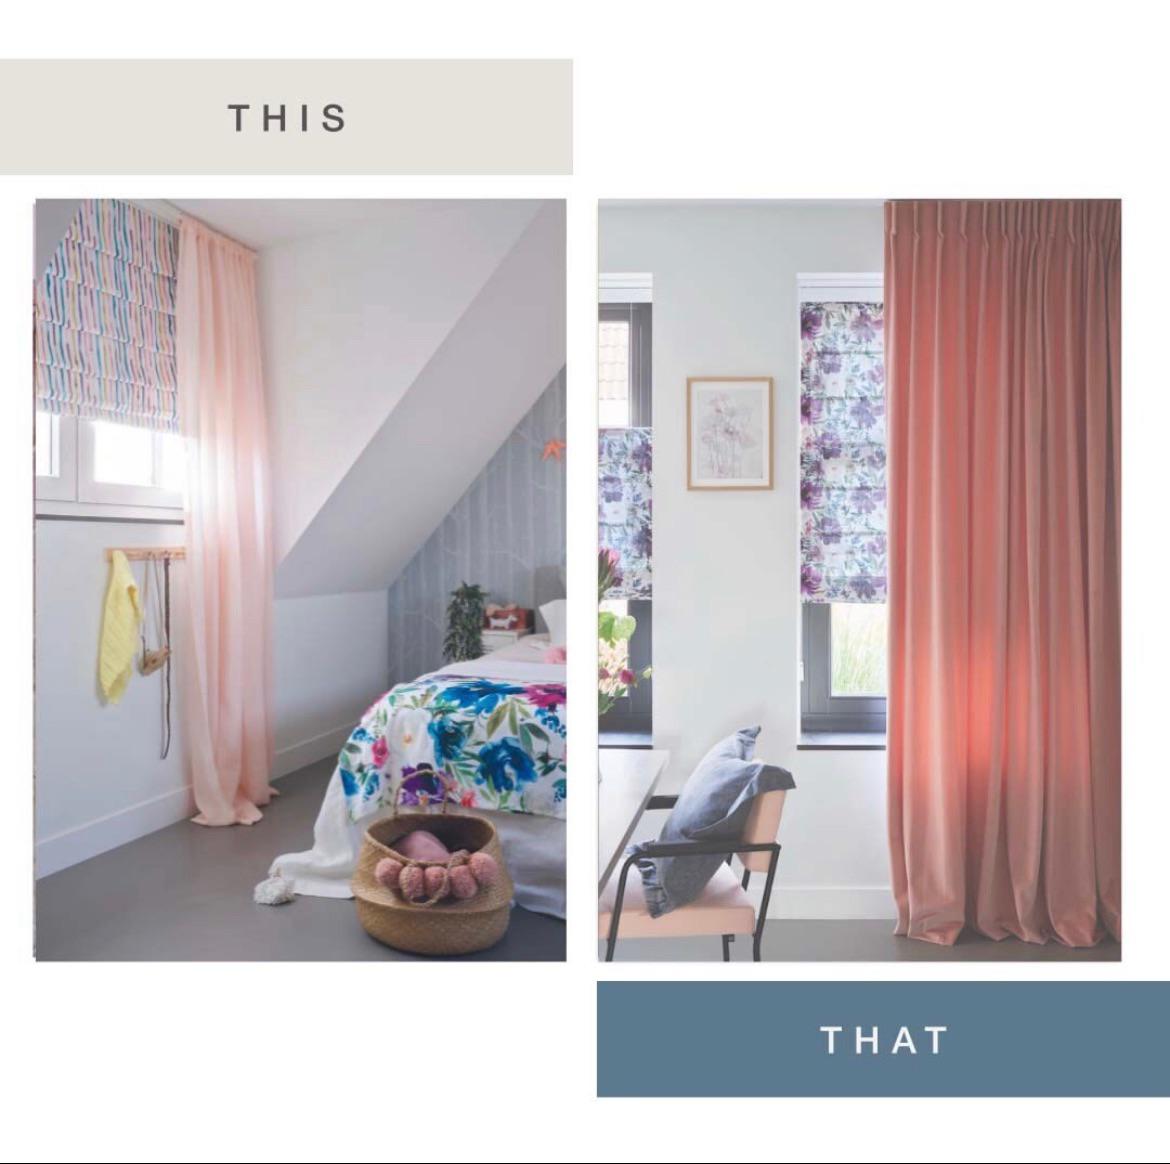 Which layered look do you prefer? The playful pink sheer drapery with multi-colored Roman shades (left) or solid drapes combined with floral-patterned Roman shades (right)?